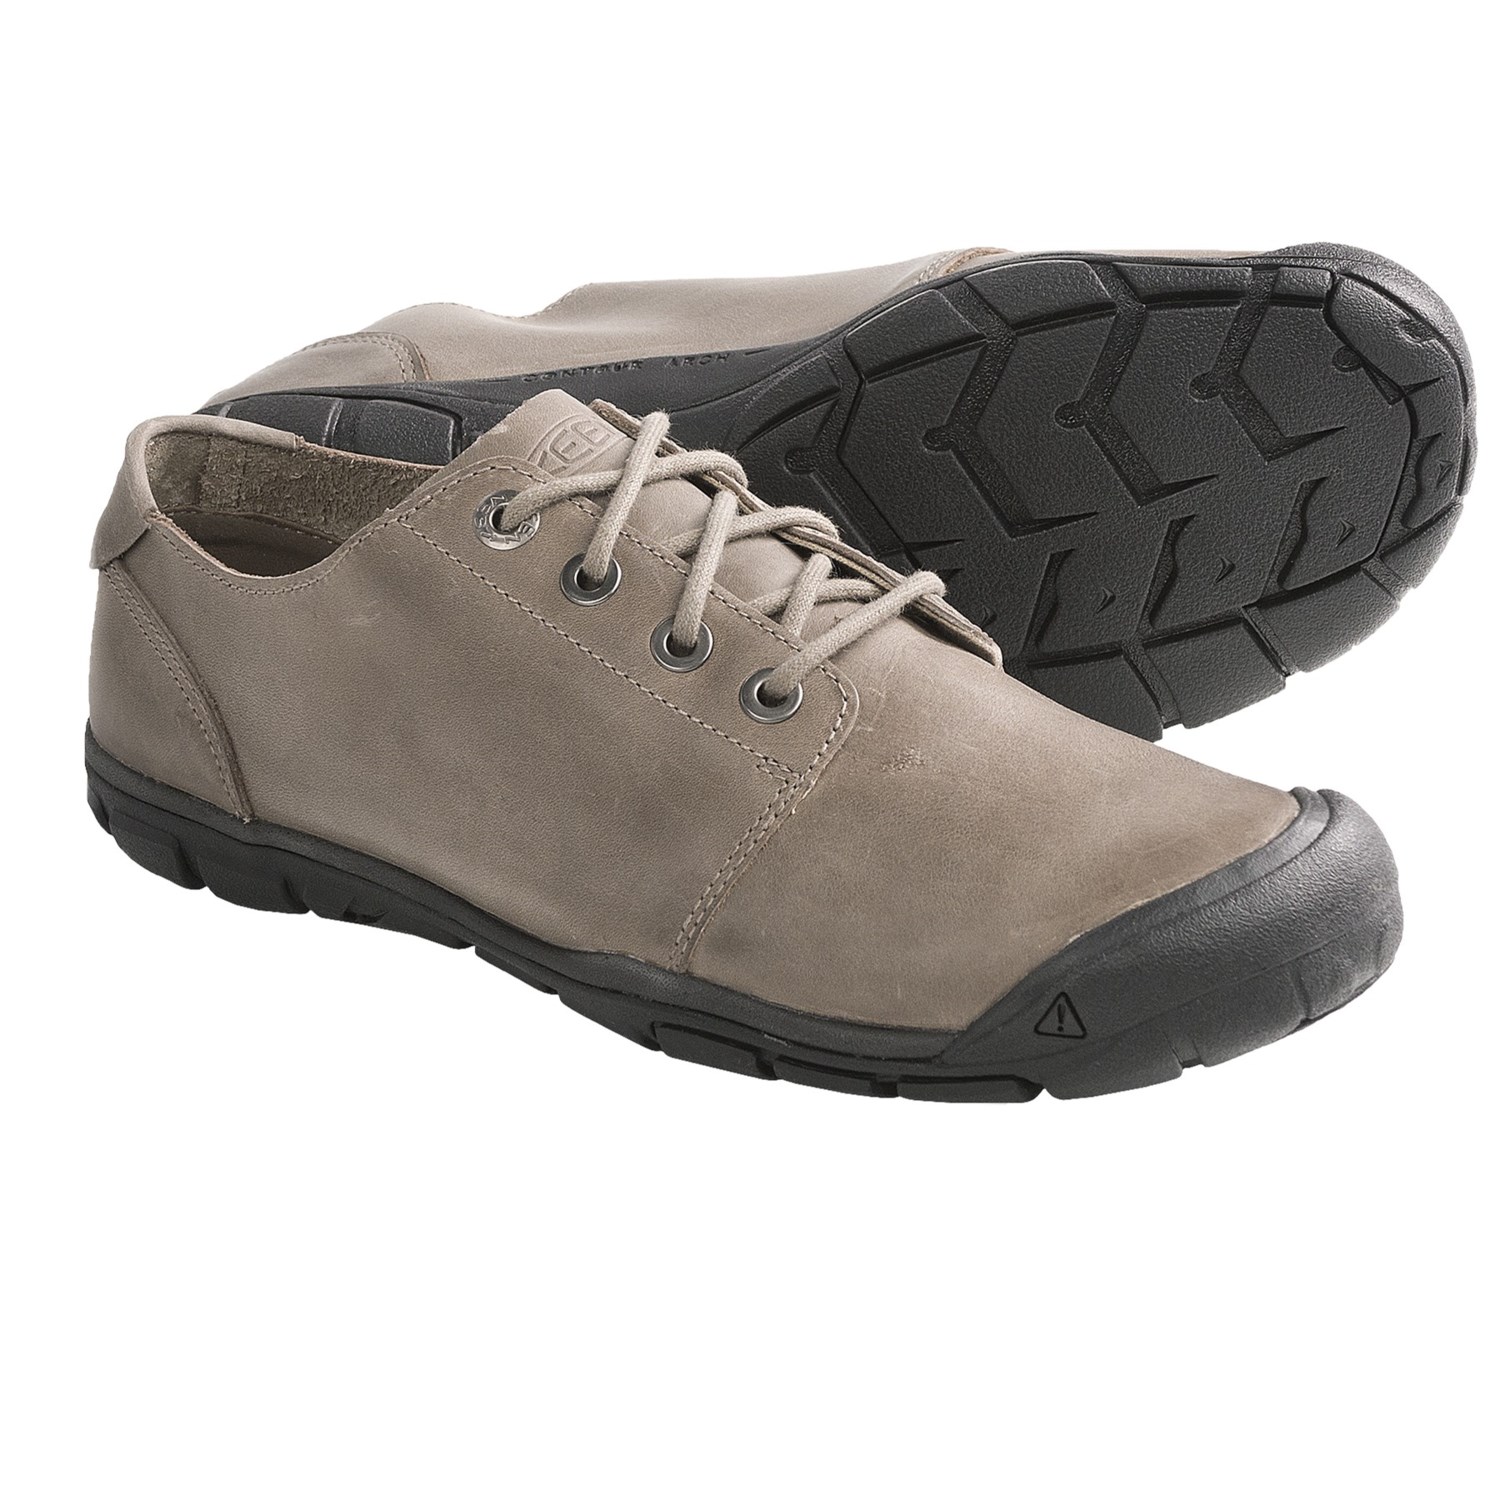 Keen Bleecker Lace CNX Shoes (For Men) 6444G - Save 22%